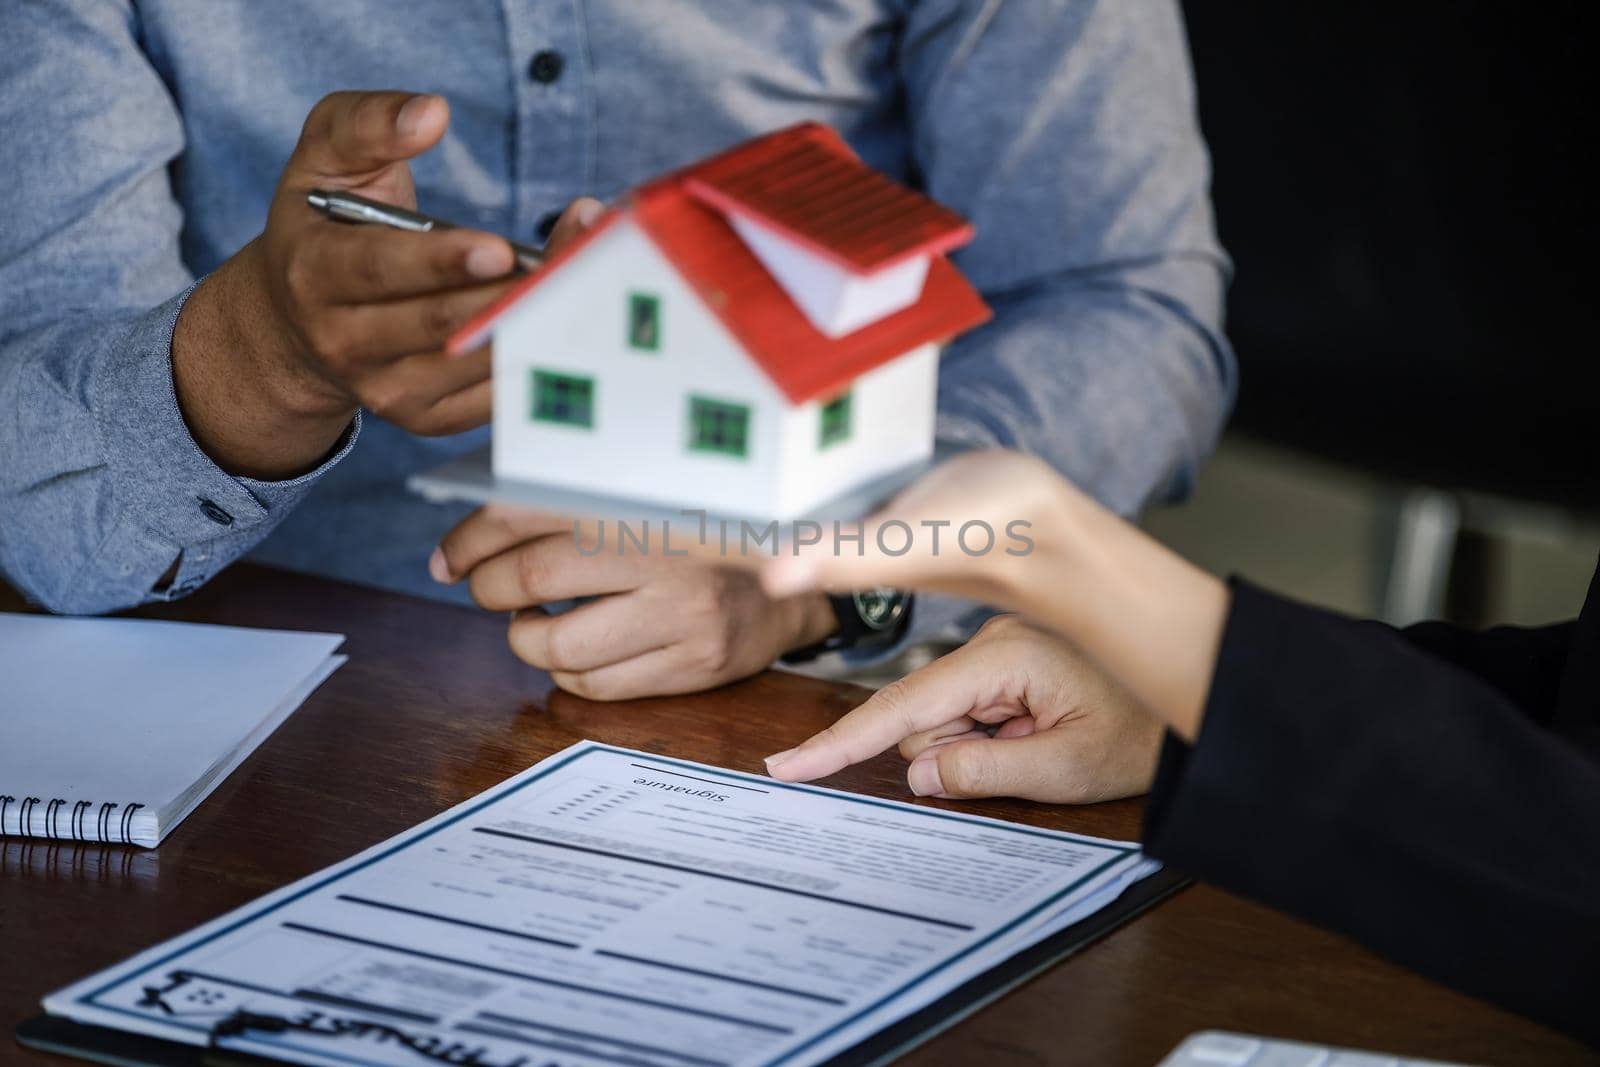 Loan signing concept, refinancing, home and land purchase, rental accommodation, female real estate agent or bank employee pointing to a contract or agreement with a male client to to Buy a dwelling